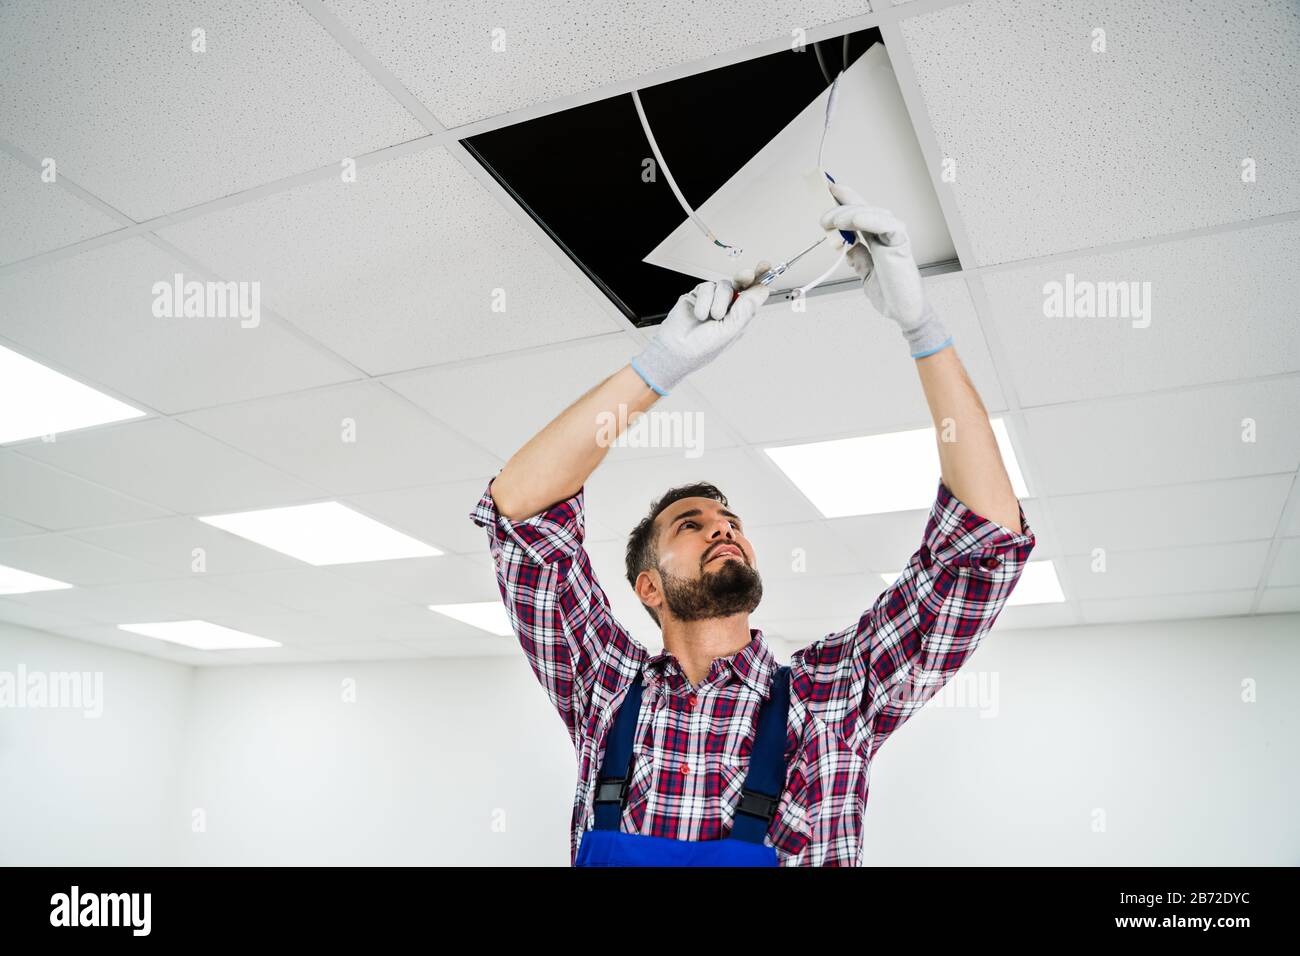 Full Length Portrait Of Electrician On Stepladder Installs Lighting To The Ceiling In Office Stock Photo